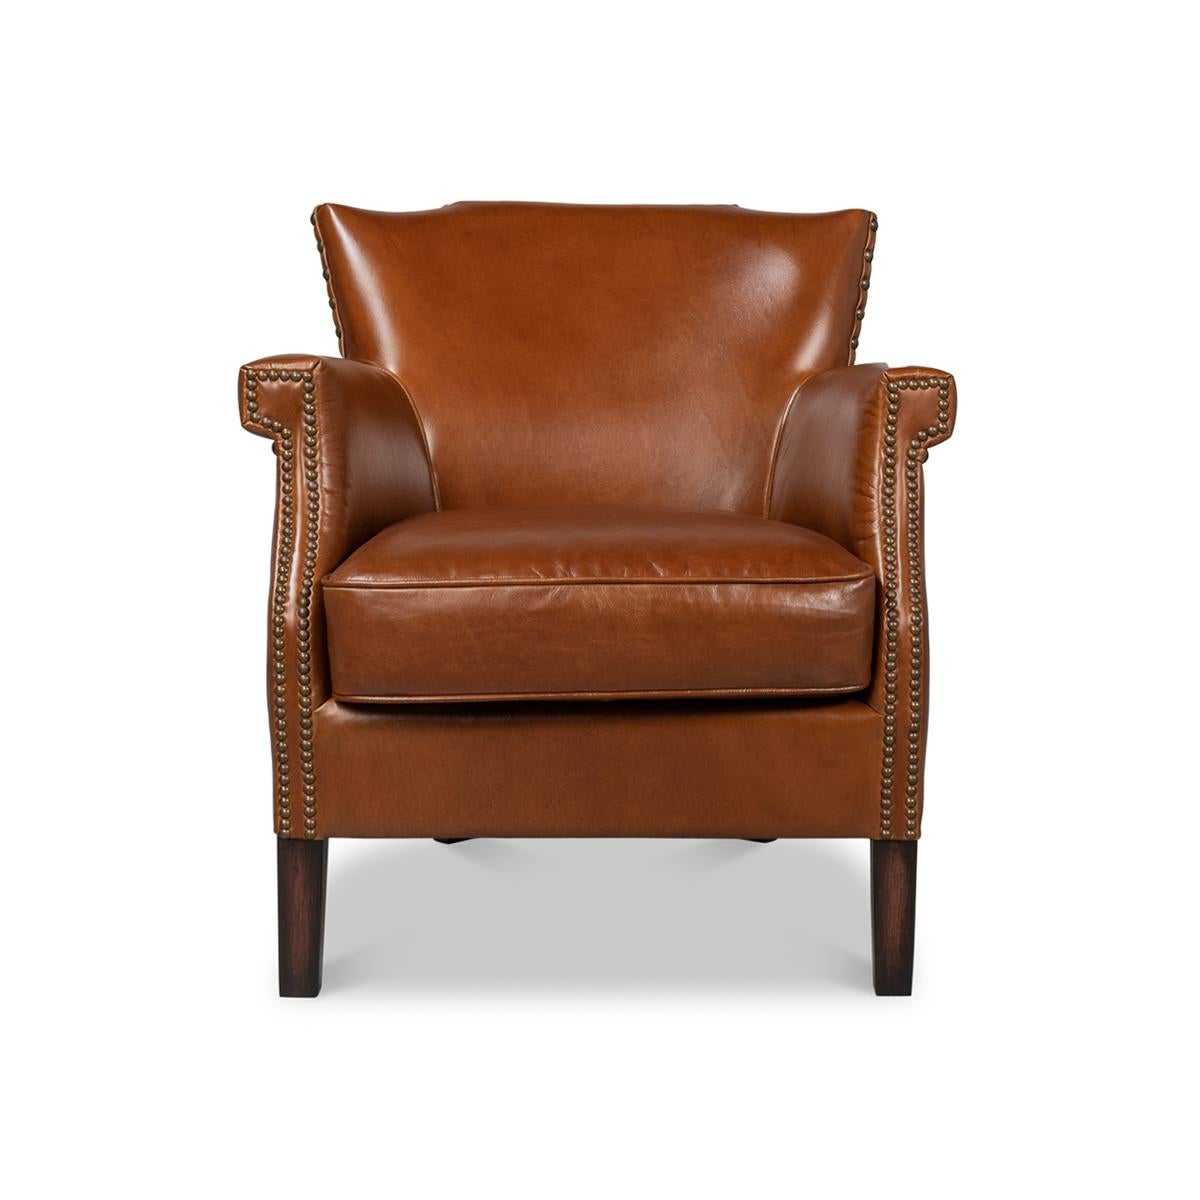 Upholstered with vintage style Havana brown leather. This handsome chair has been given some angles that you will enjoy. The seat back almost wants to be a wing but is gently angled instead. Slender arms, welted seat cushion and dramatic nail head